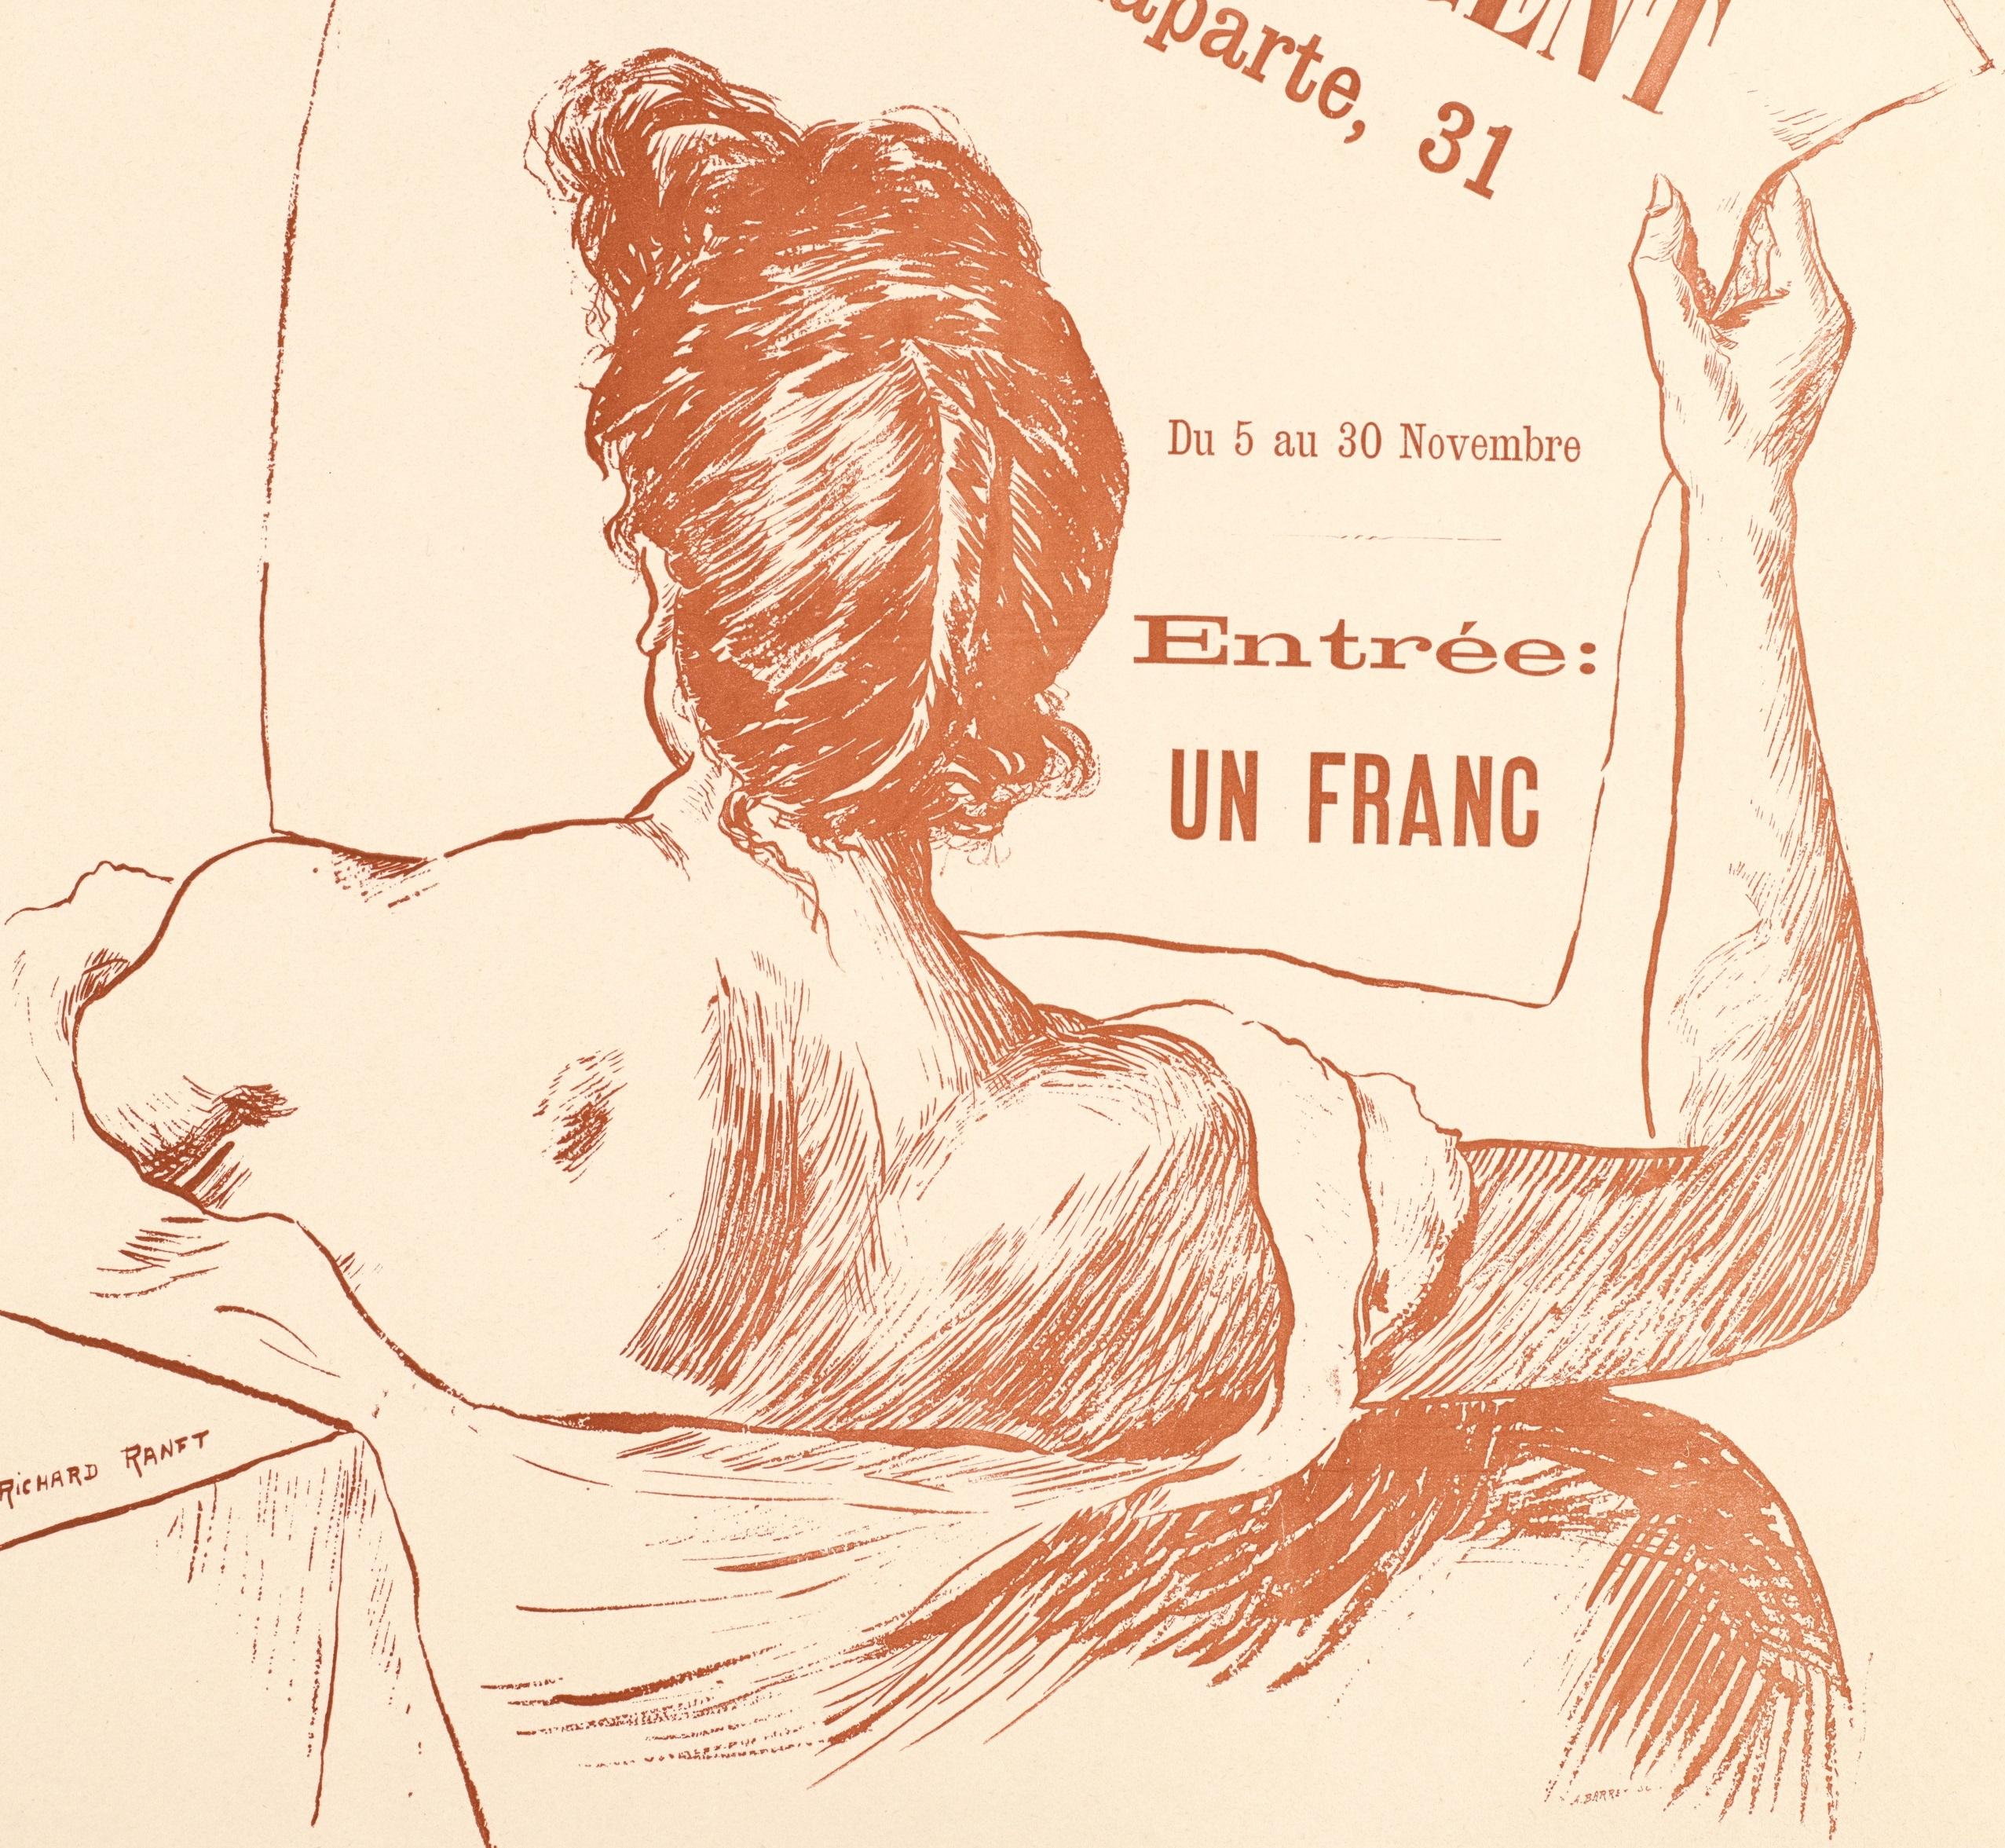 Original Vintage Poster-Richard Ranft-Salon des Cent-The Feather, 1894

Poster for the 6th edition of the Salon des Cent in November 1894.

A woman lying on a sofa is reading La Plume newspaper. The interior decorated with wallpaper with a white